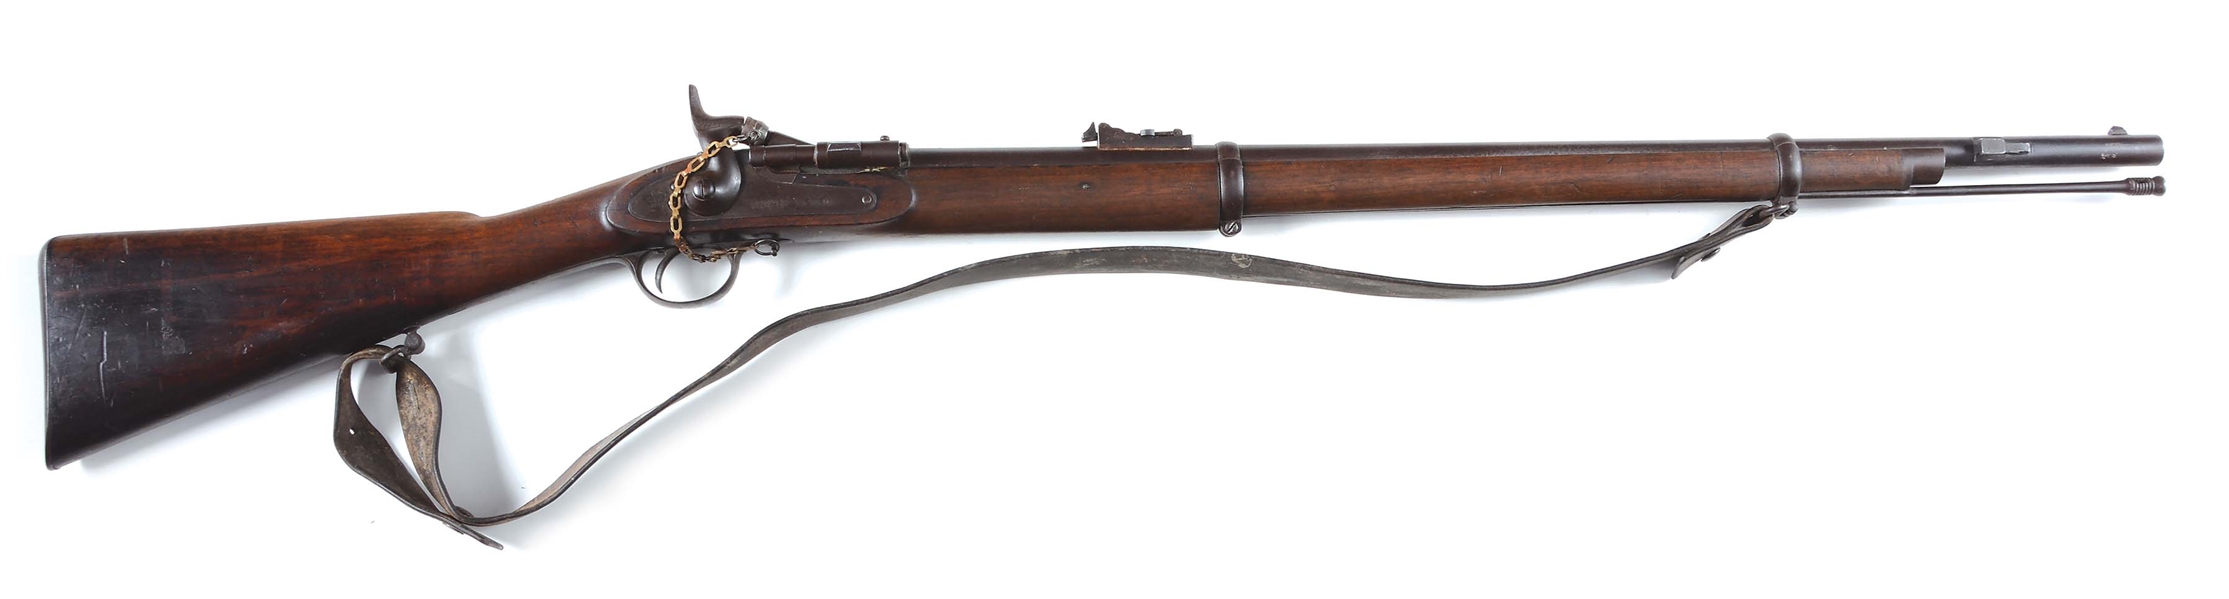 (A) 1859 DATED ENFIELD MILITARY RIFLE WITH SNIDER CONVERSION. 